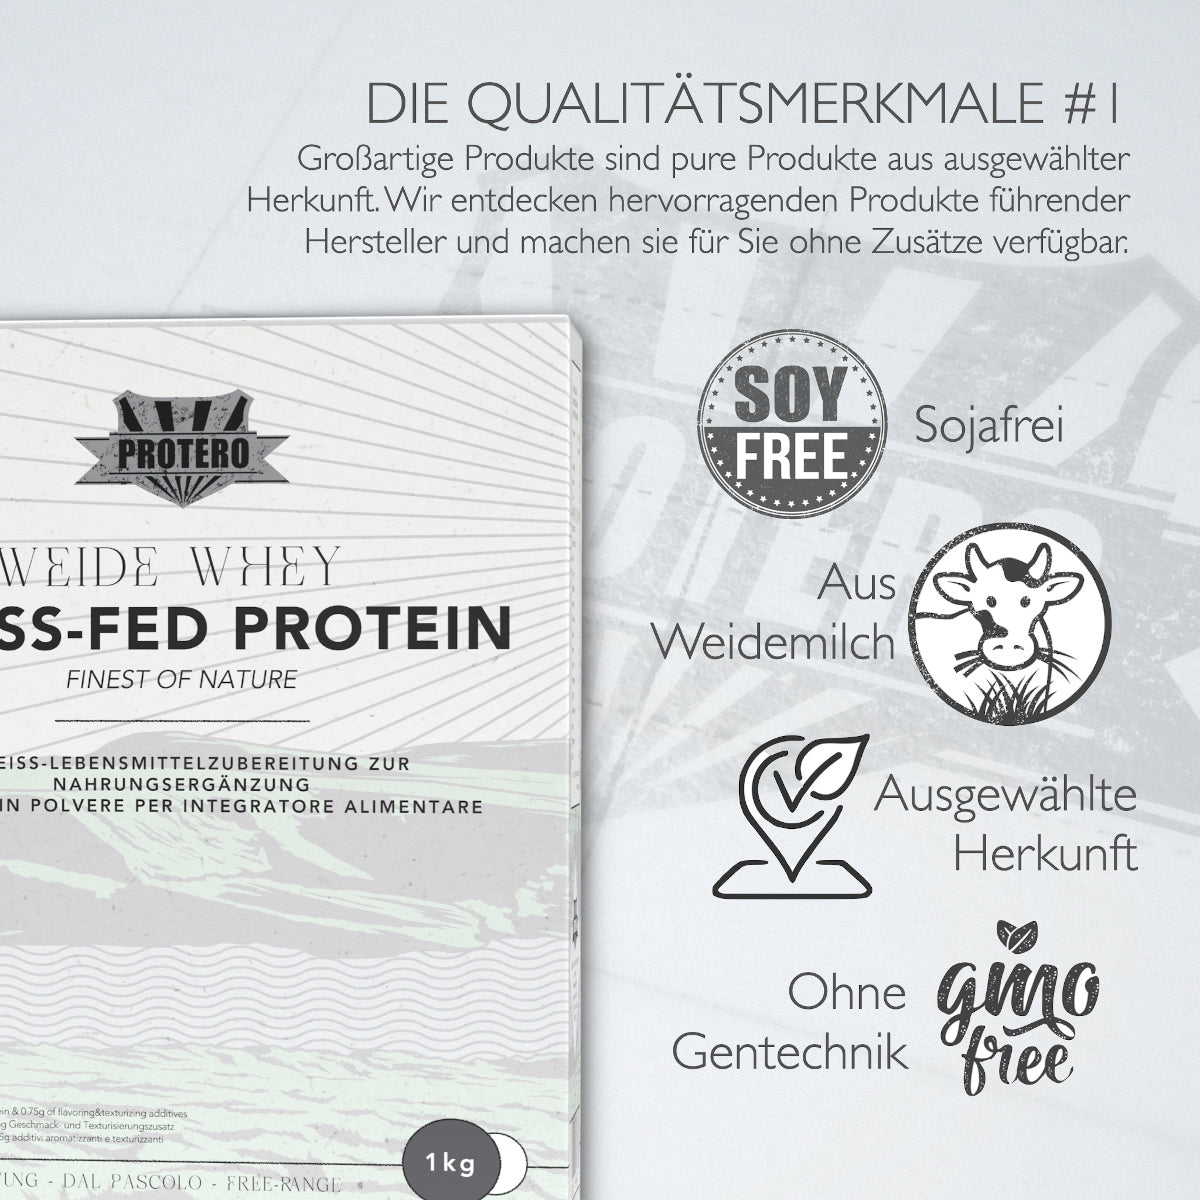 Grass-Fed Whey-Protein Pure